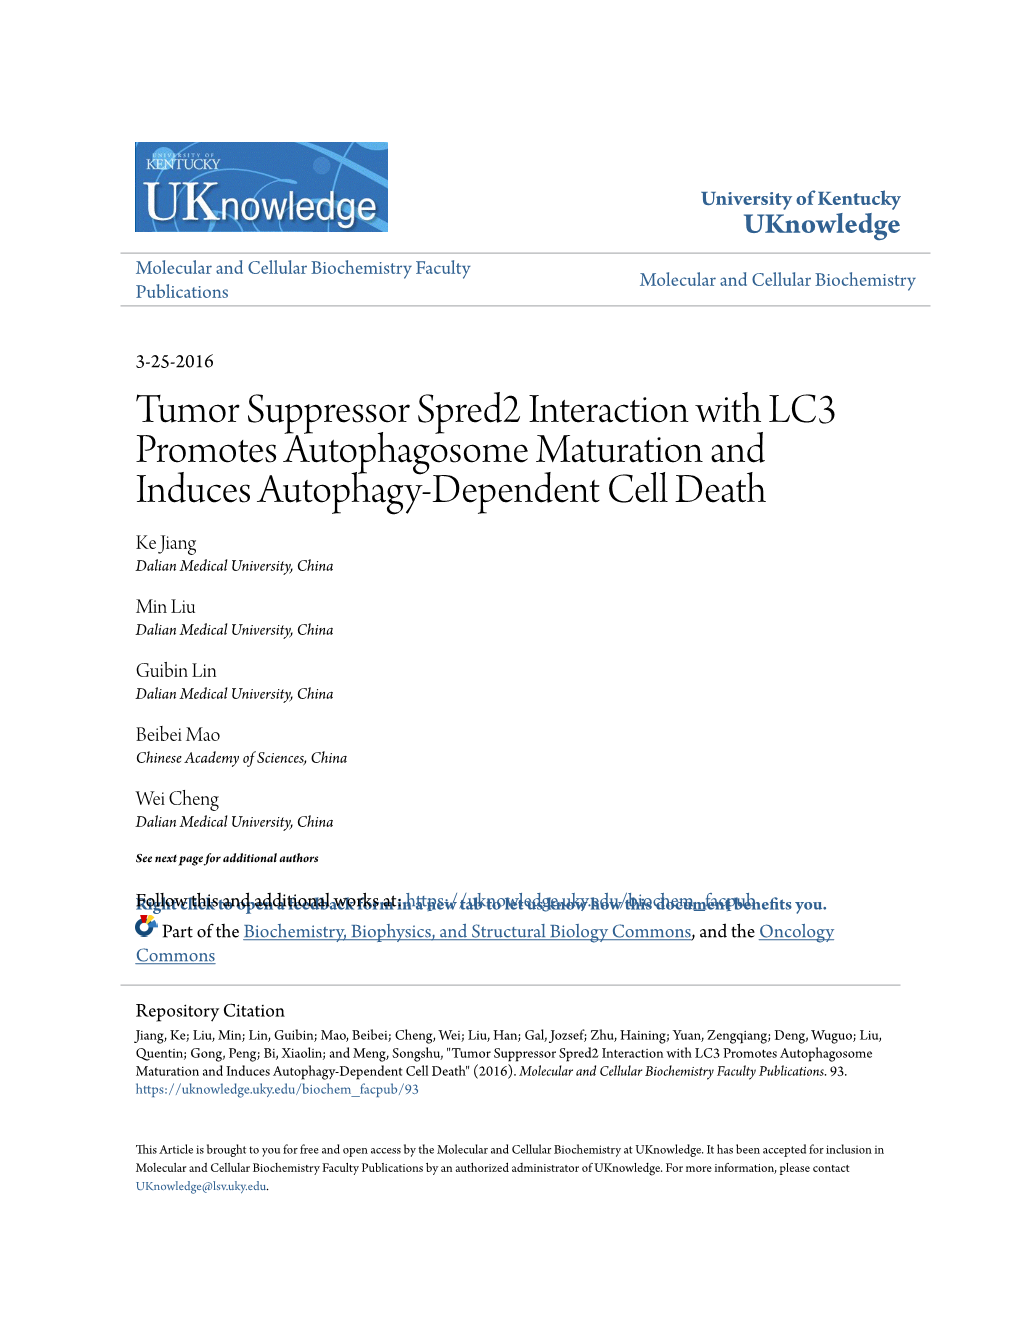 Tumor Suppressor Spred2 Interaction with LC3 Promotes Autophagosome Maturation and Induces Autophagy-Dependent Cell Death Ke Jiang Dalian Medical University, China